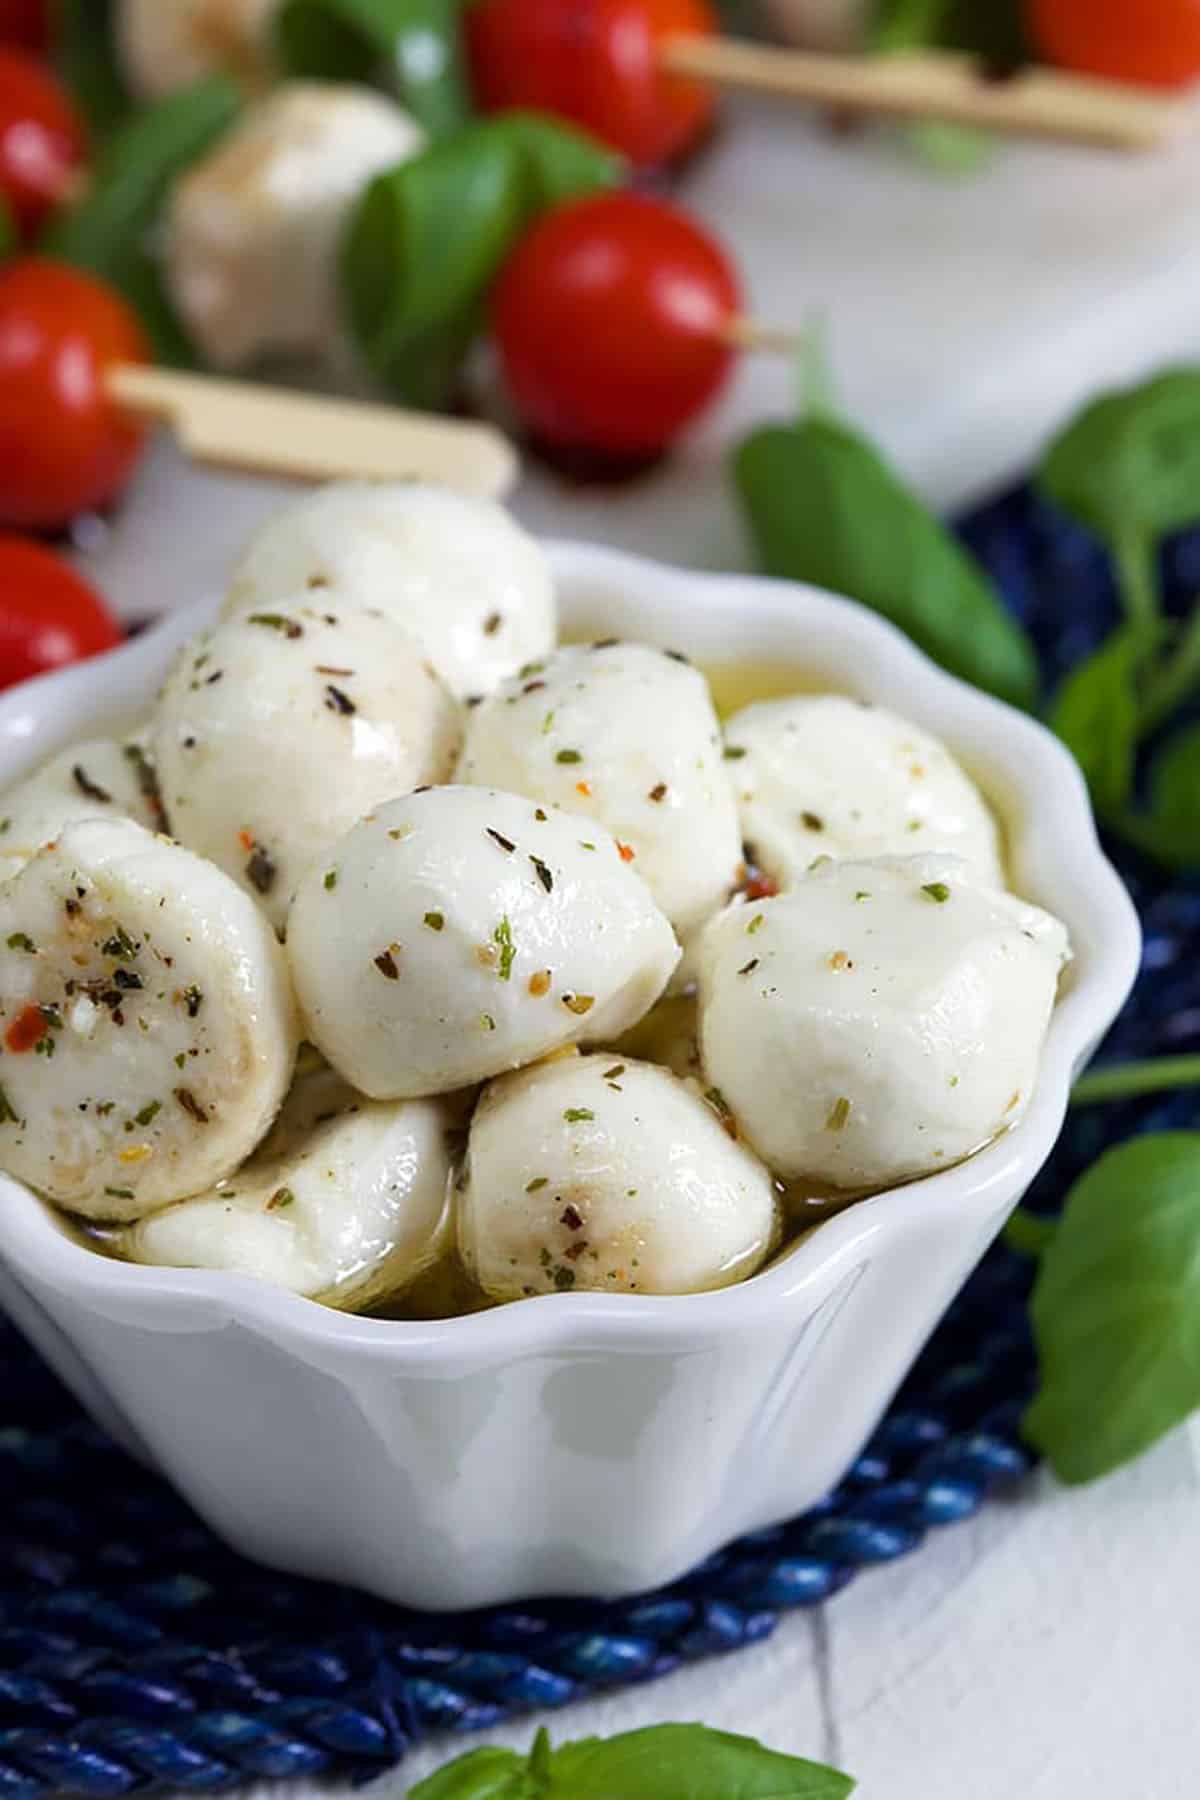 Marinated mozzarella balls in a white dish on a blue placemat.